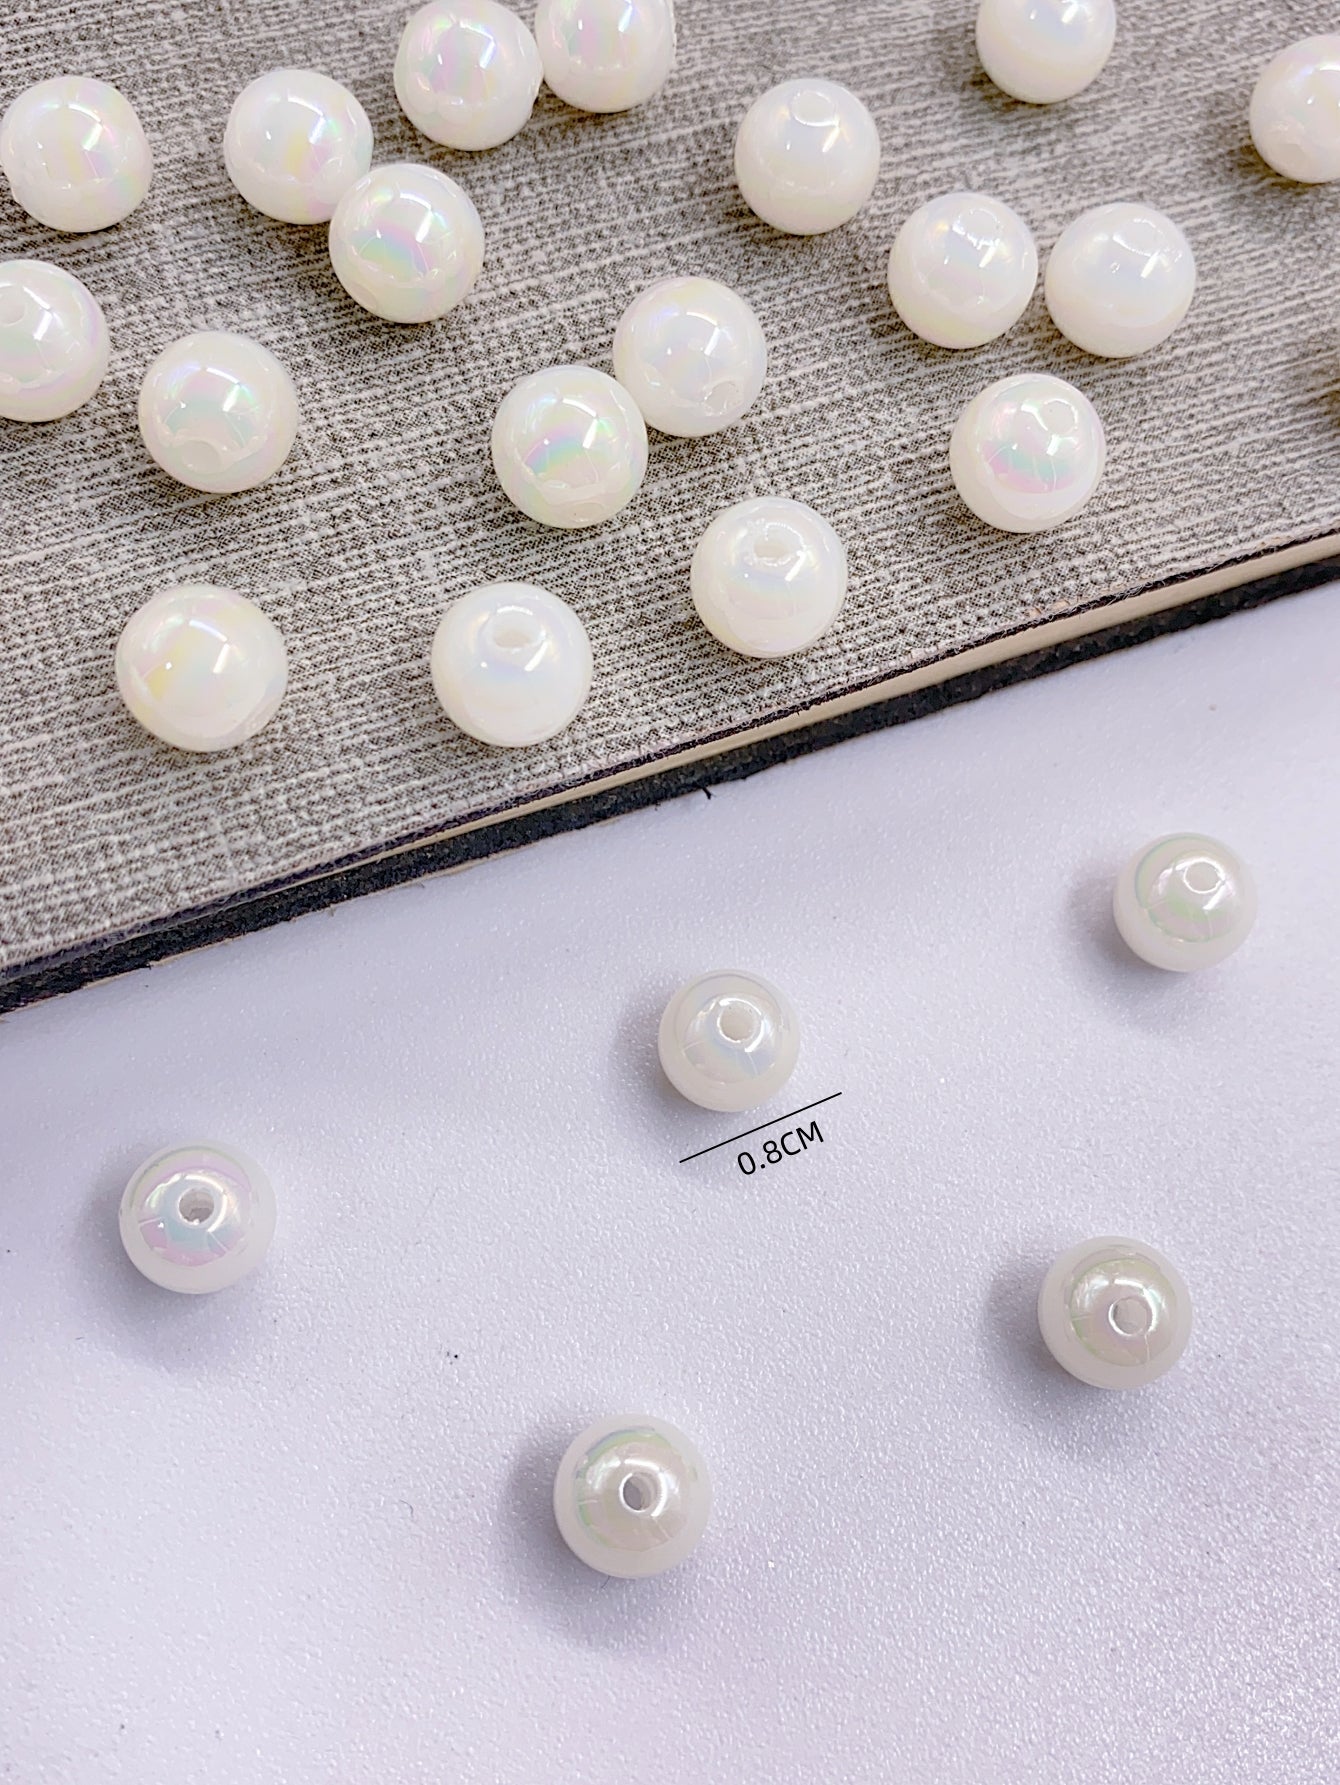 High-end bright color series ABS imitation pearl straight hole round bead jewelry beaded diy clothing necklace bracelet accessories beaded materials